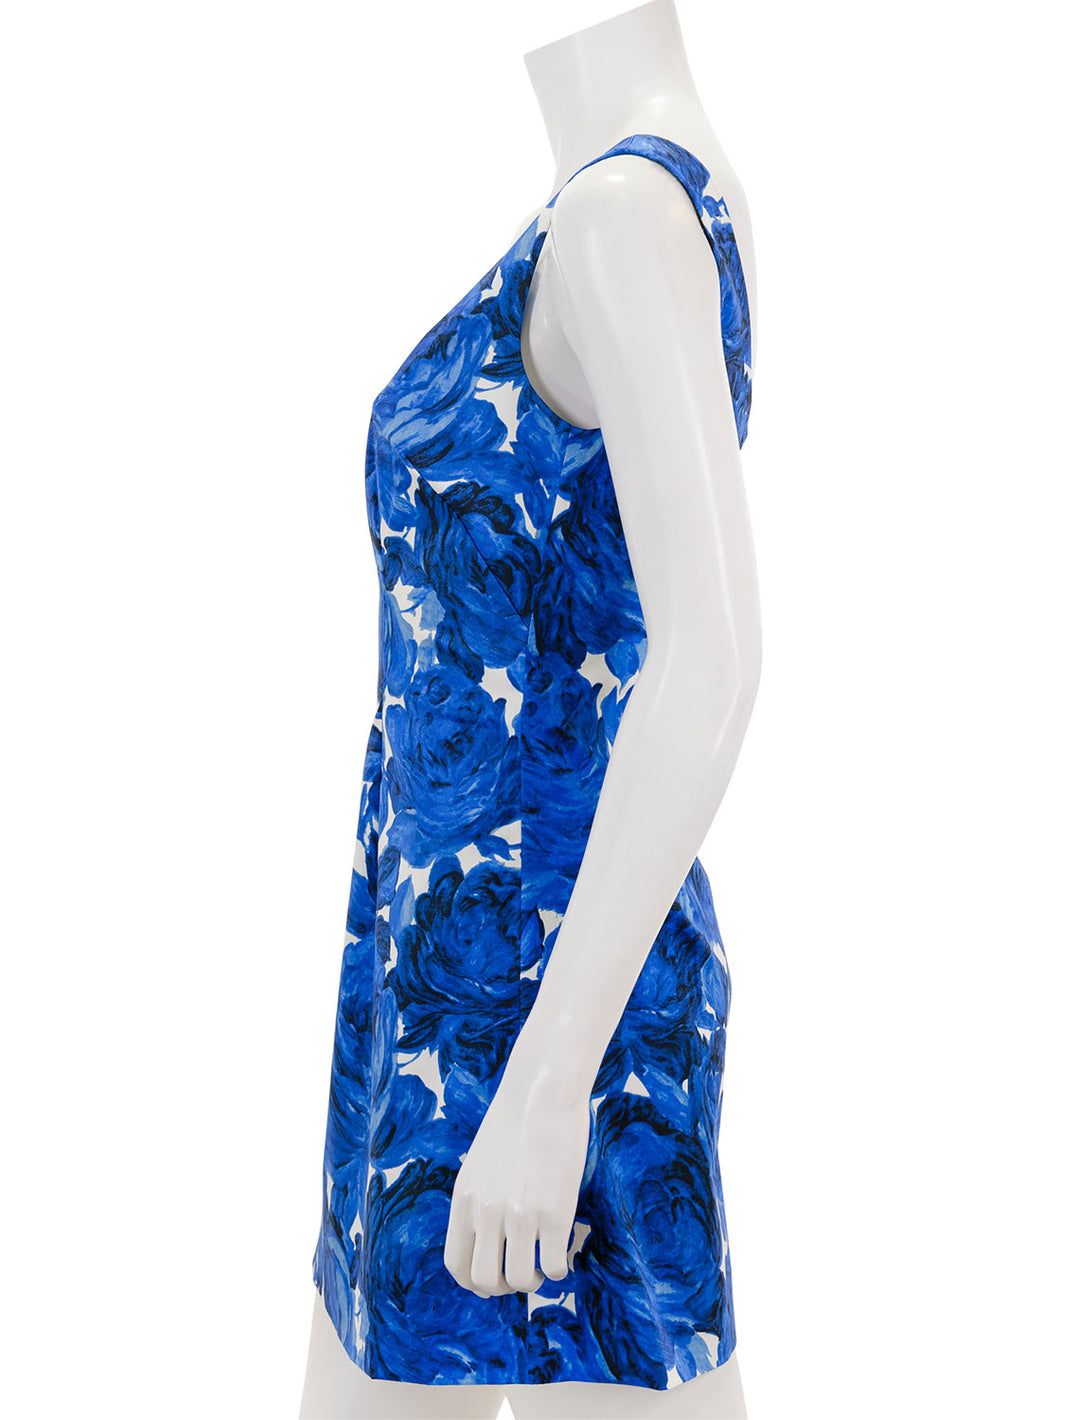 Side view of Cara Cara's sandra dress in floral garden blue.